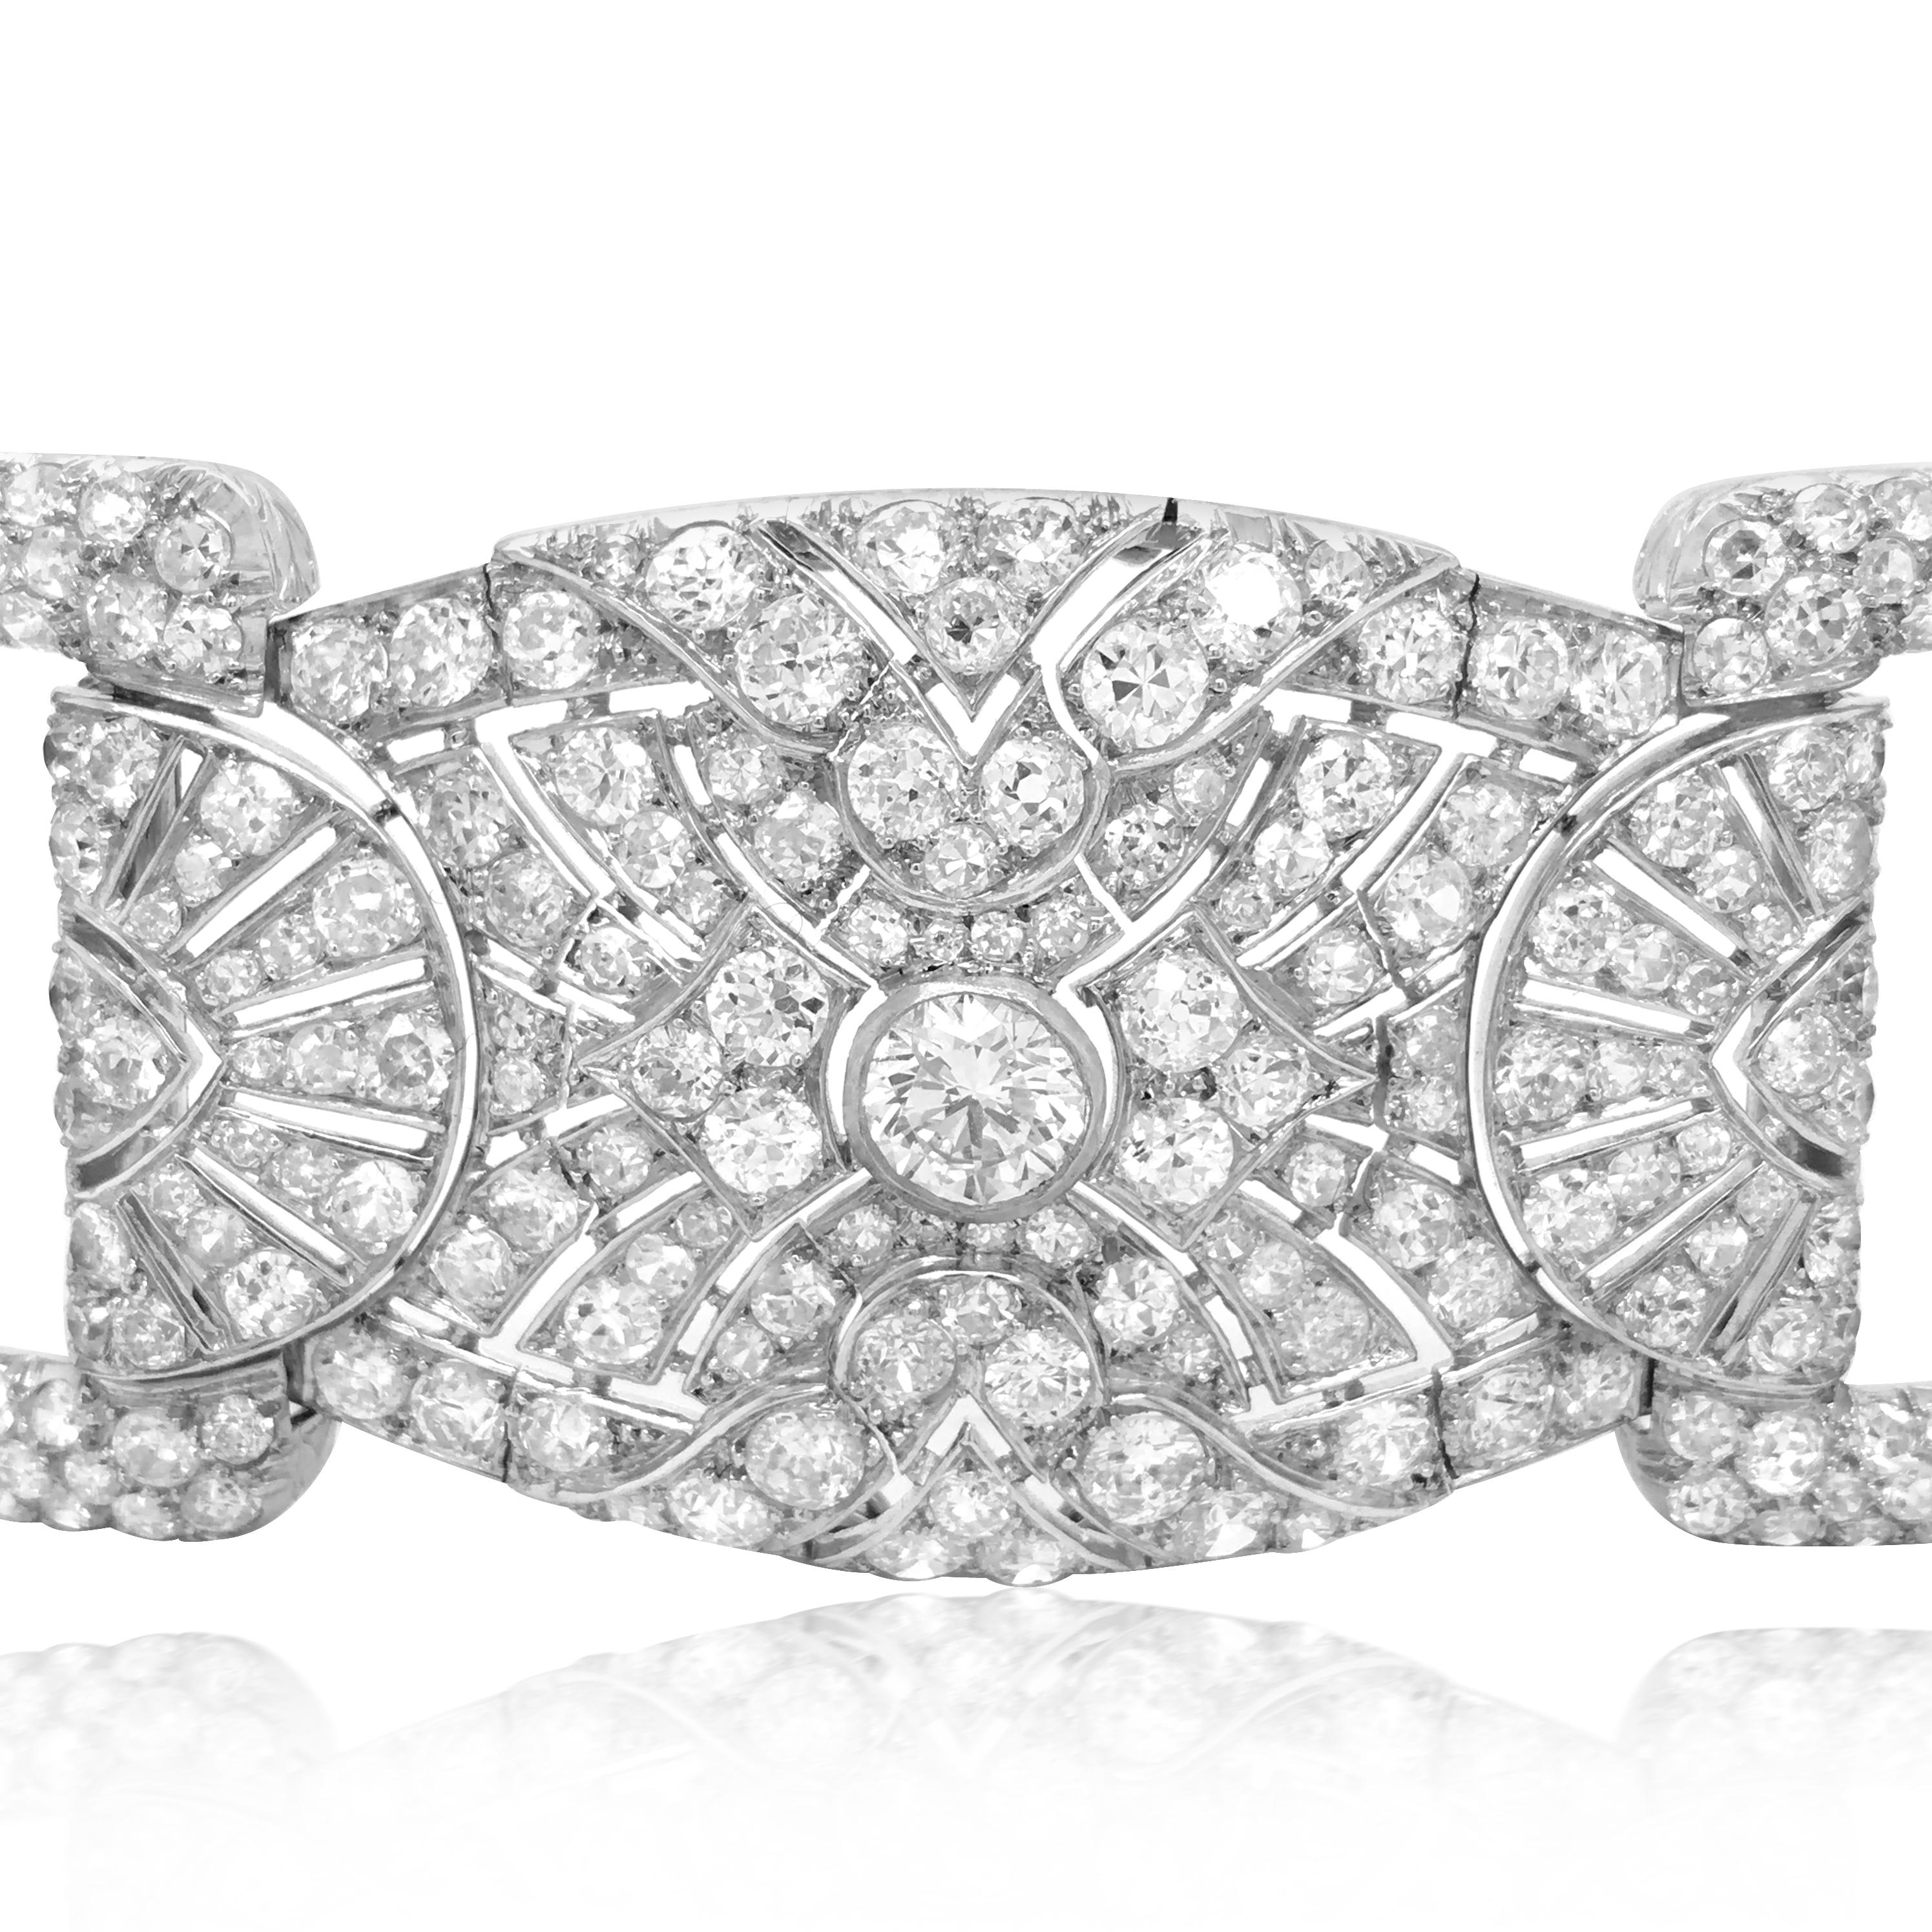 This breathtaking bracelet is finely crafted in solid platinum, weighing 97 grams and measuring 18cm (7'') long. It is adorned with three large round-cut diamonds in the center of each diamonds plaque with other various cut diamonds, weighing